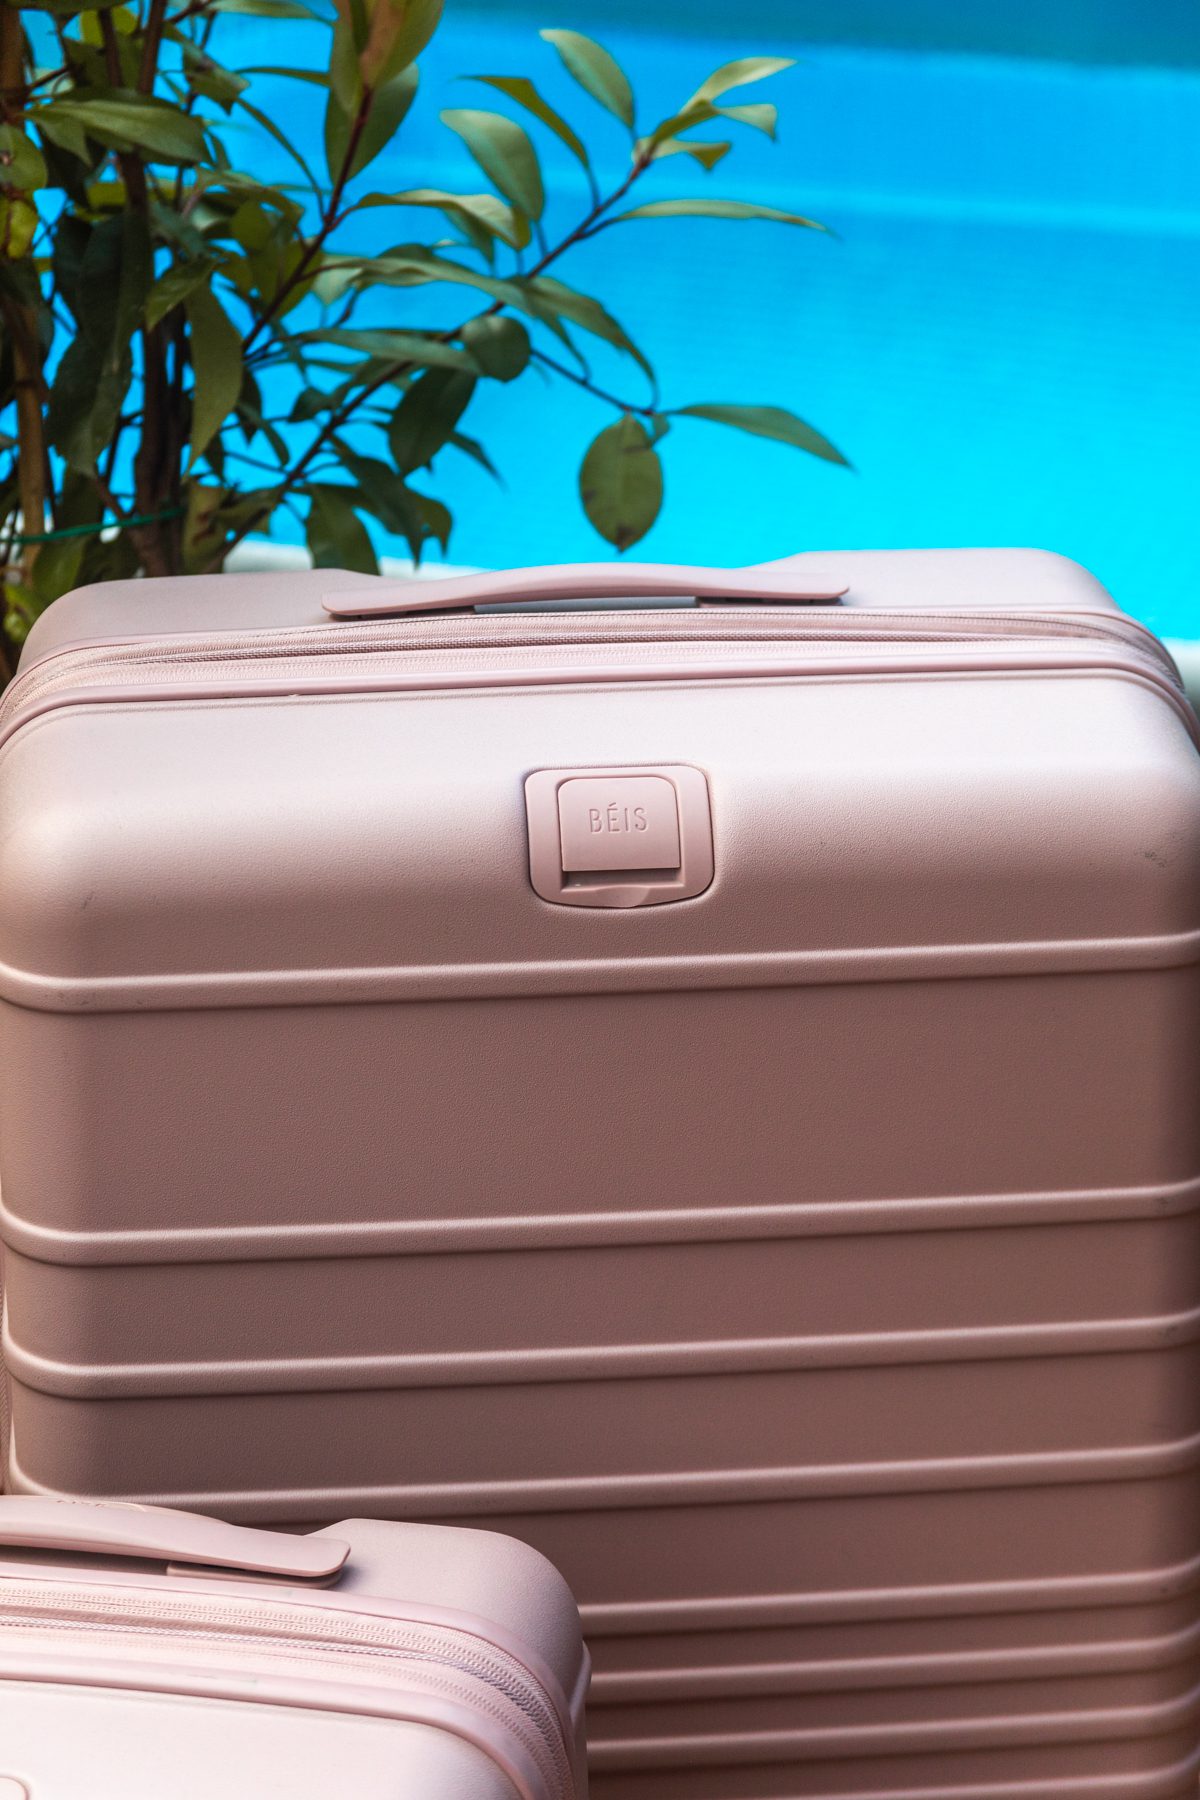 The Beis Luggage Review You Need To Read Before You Buy: Worth The Money?